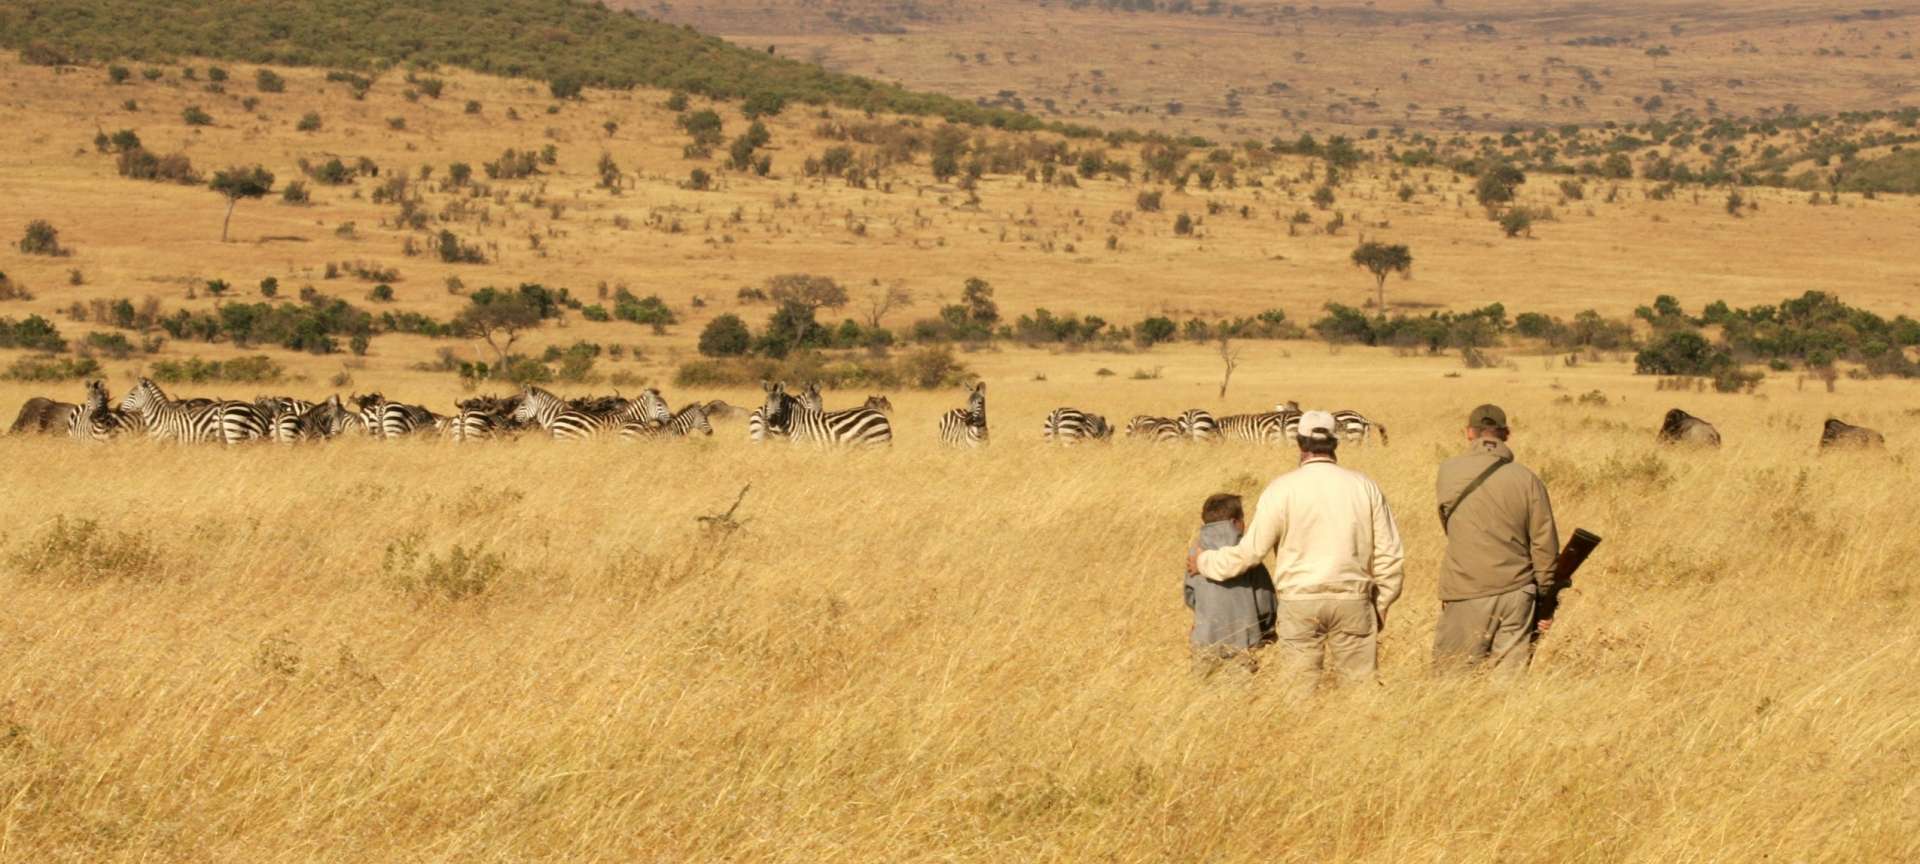 Guided safaris are ideal for families